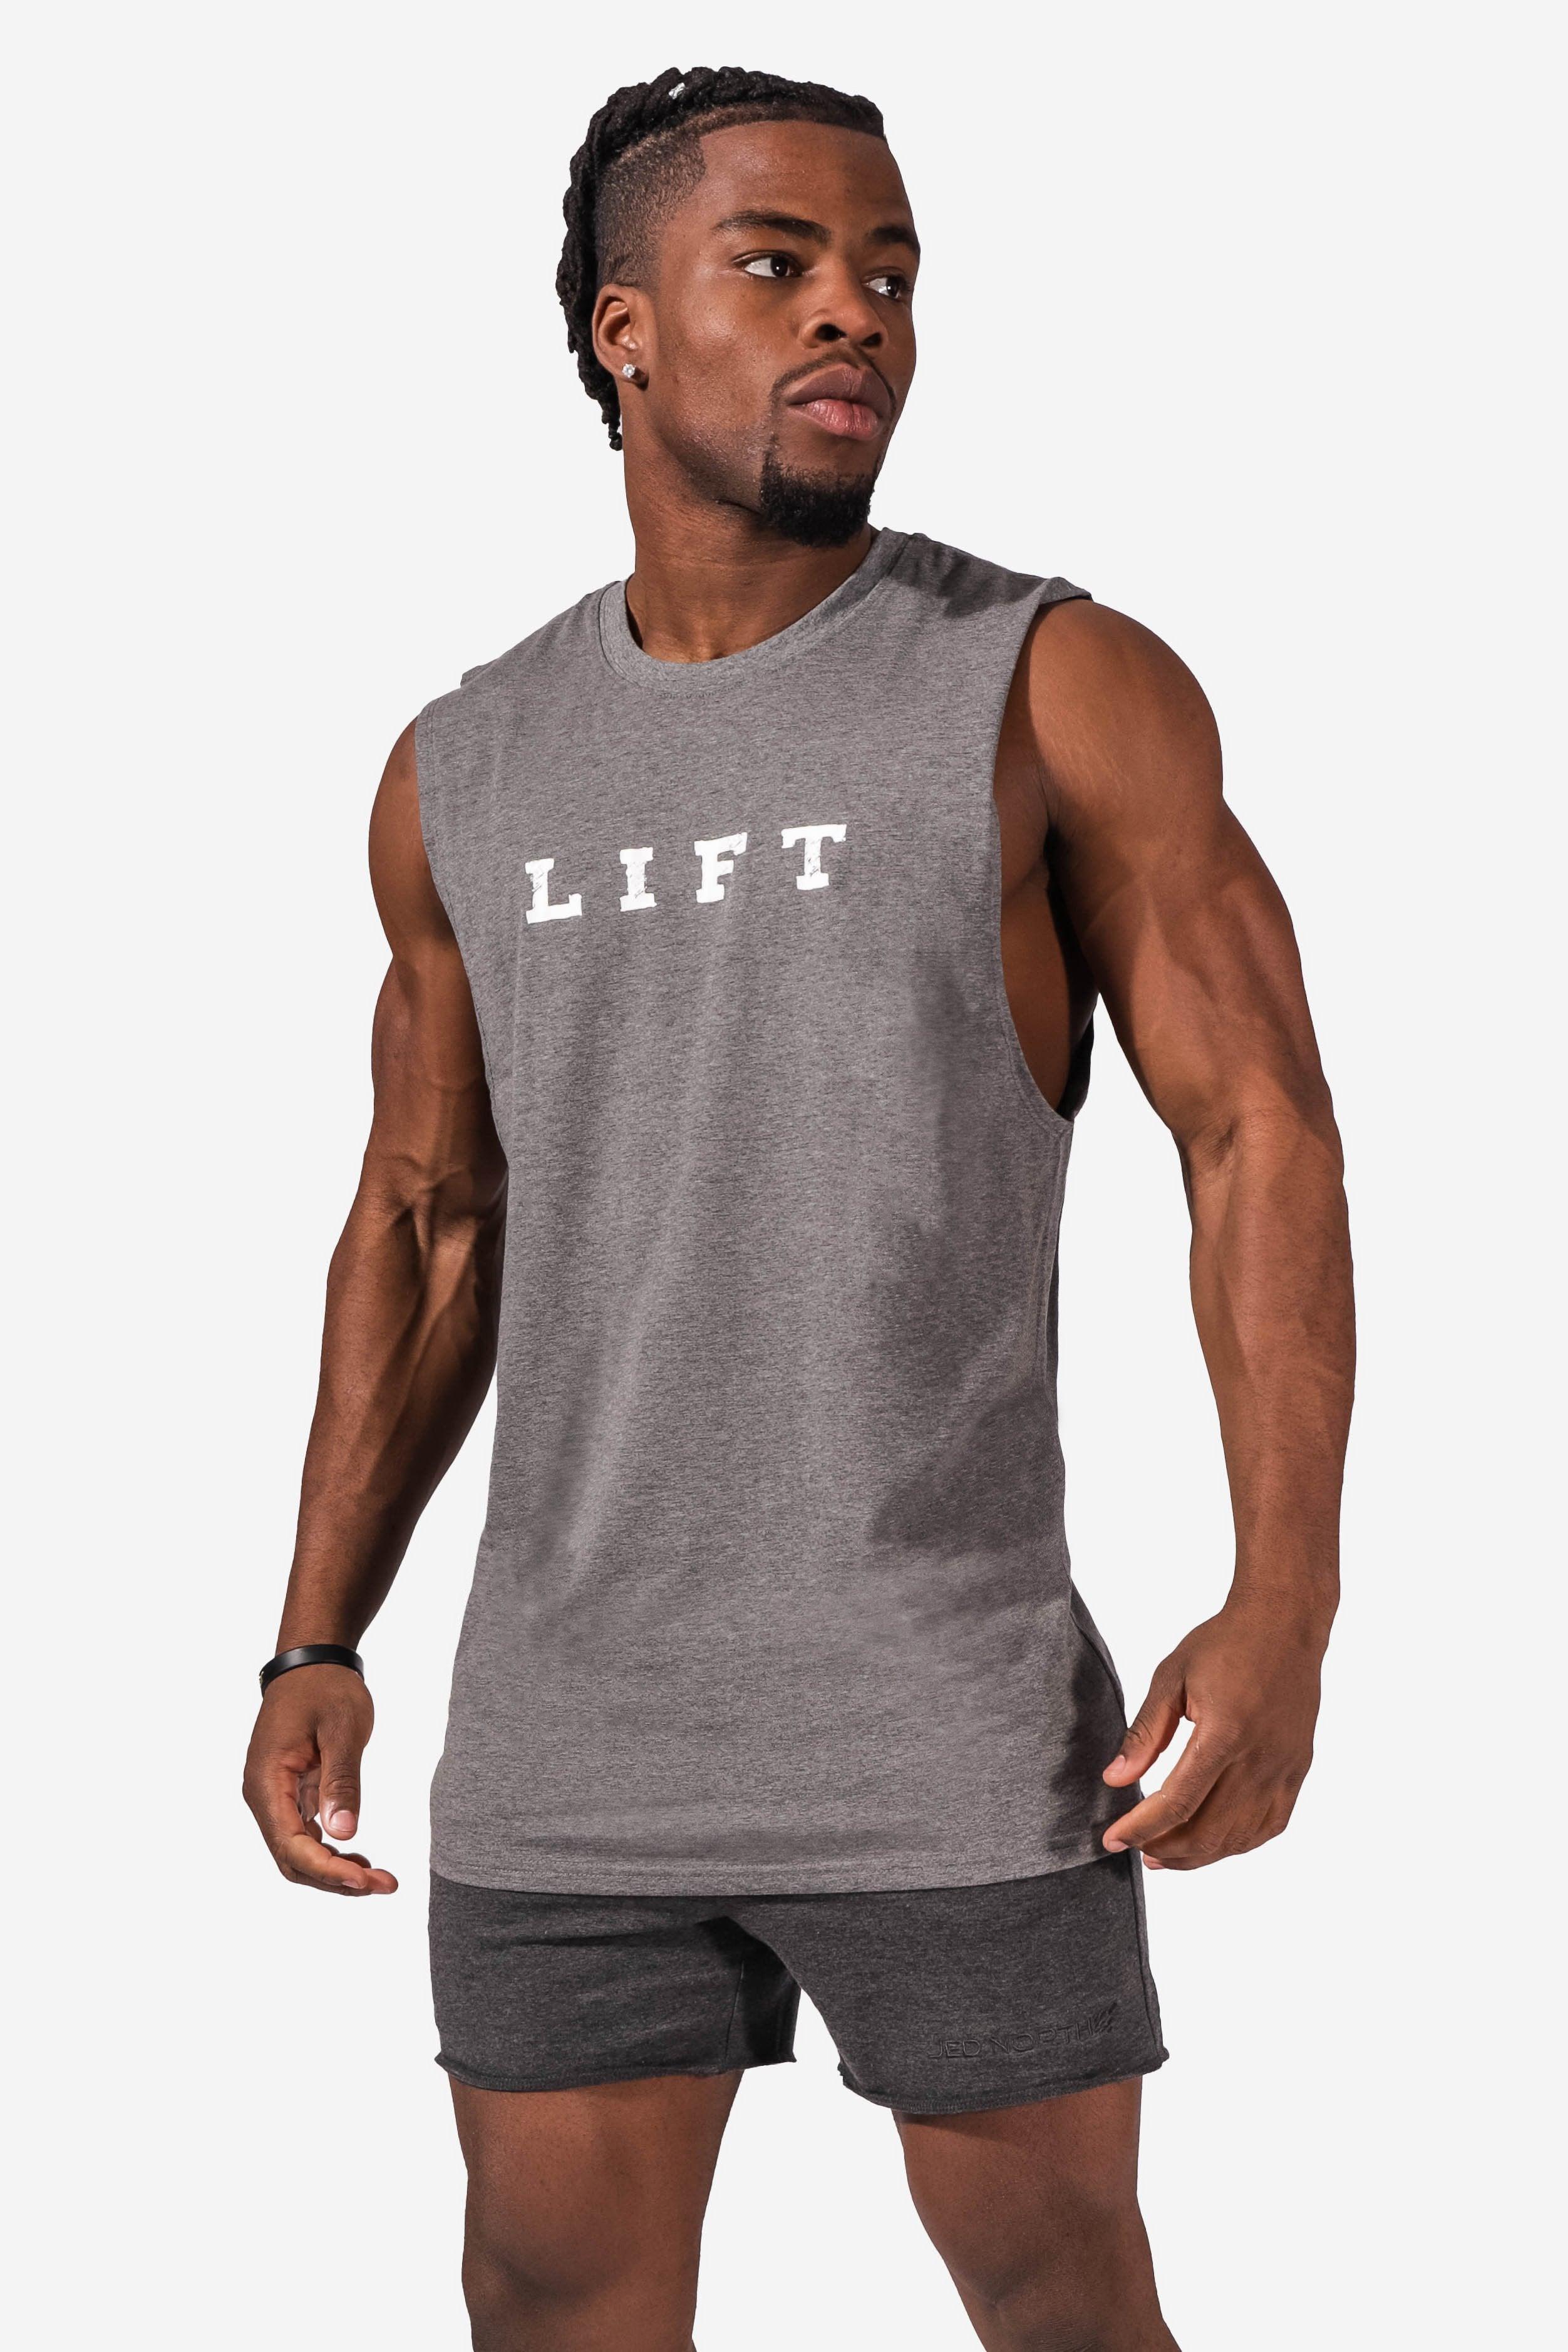 Lingt Chic Men's Gym Body Building Sports Running Workout Training Exercise Fitness Tees Shirt